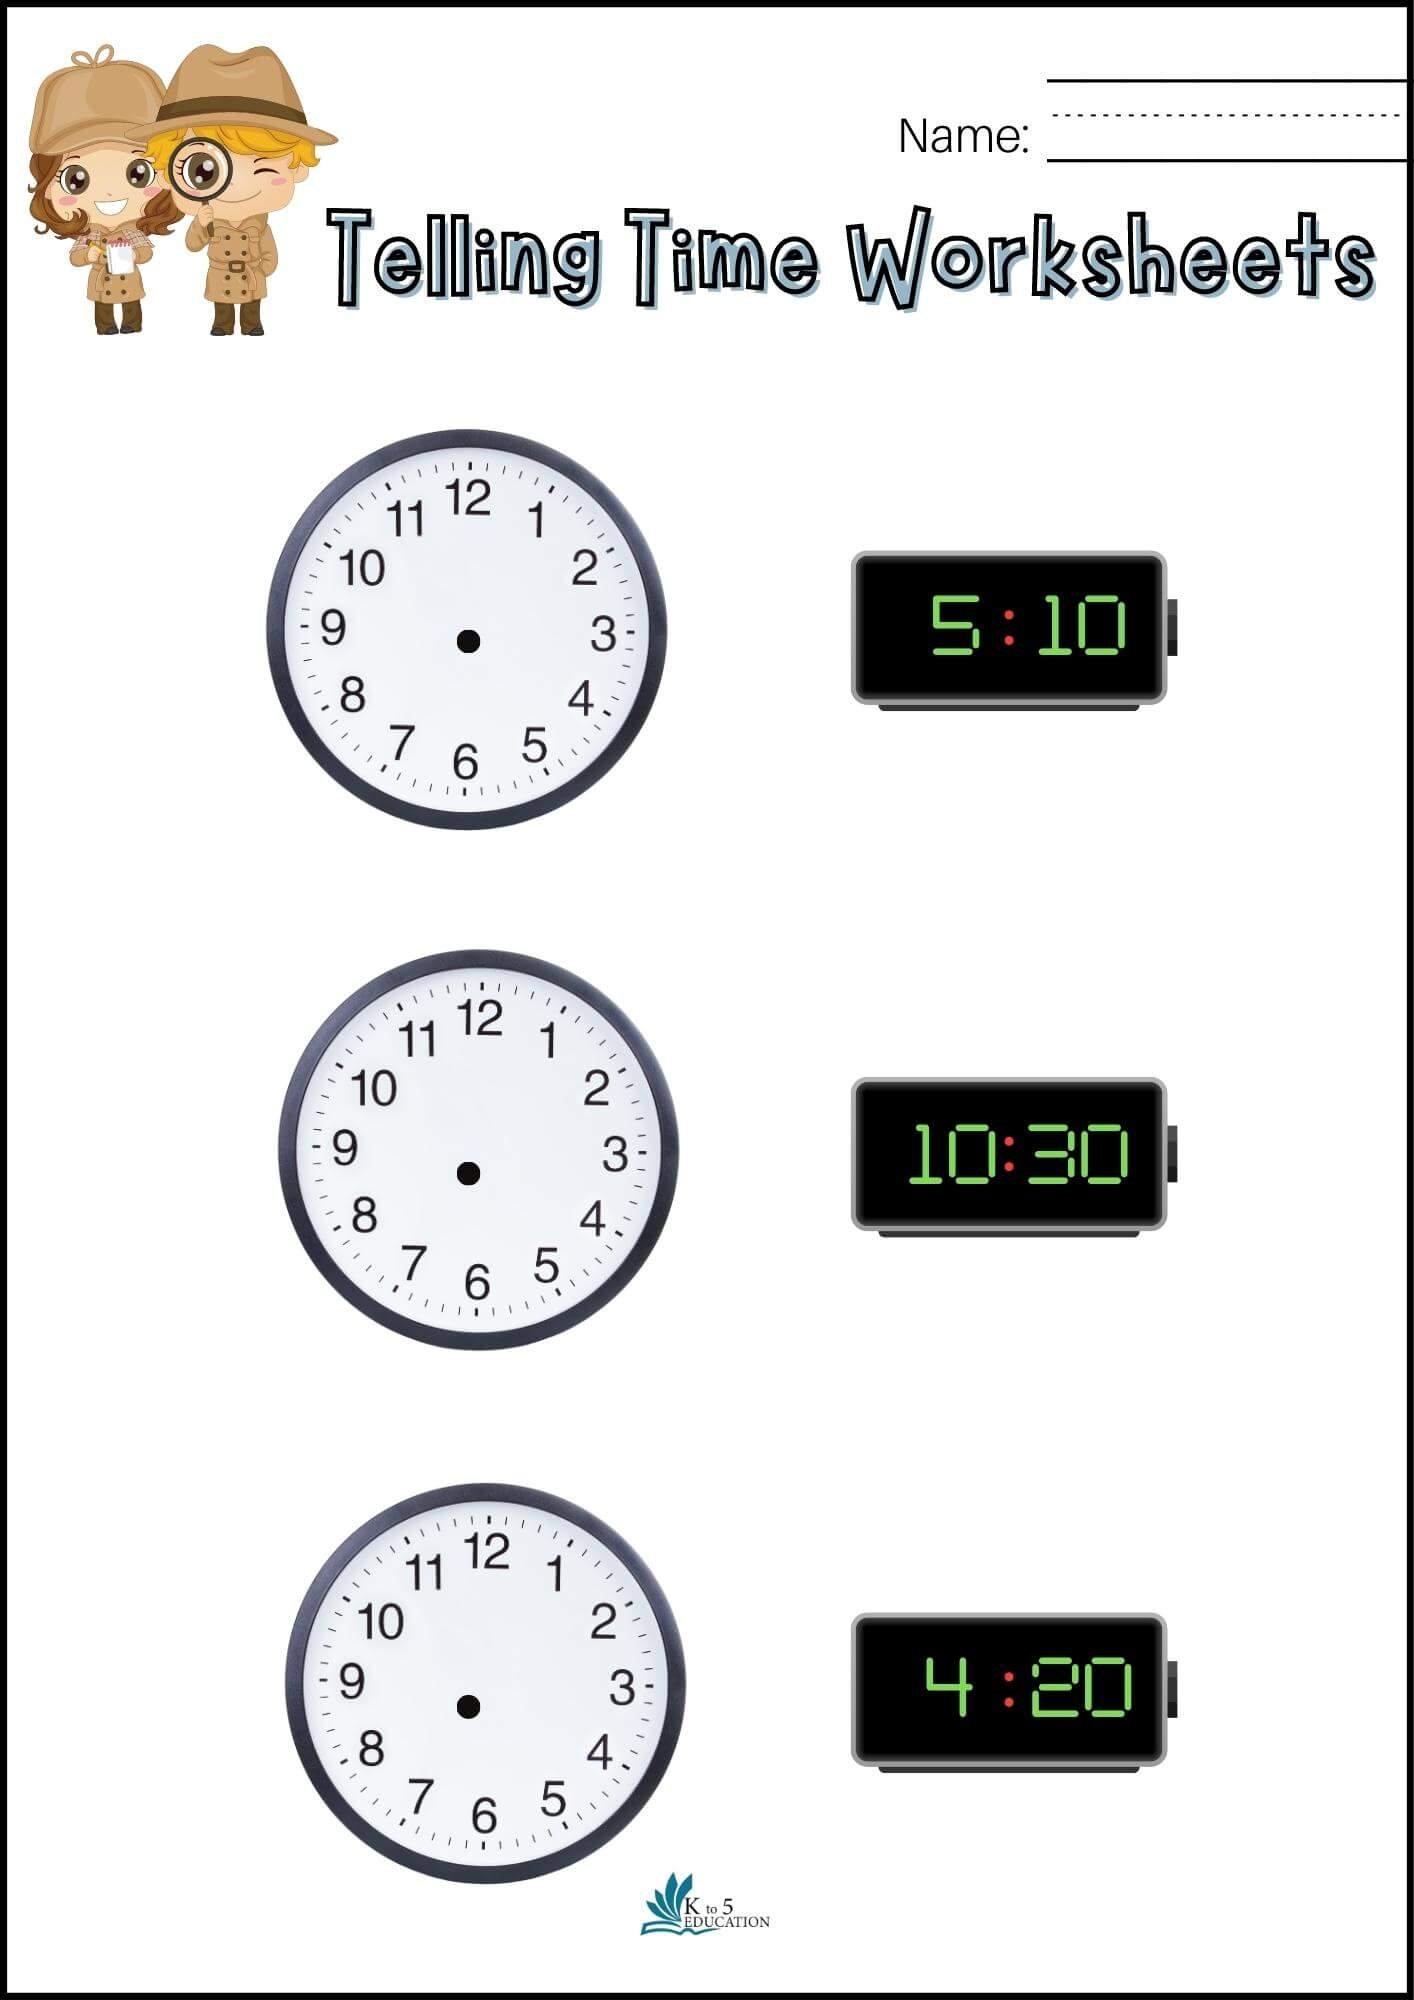 Worksheets About Telling Time